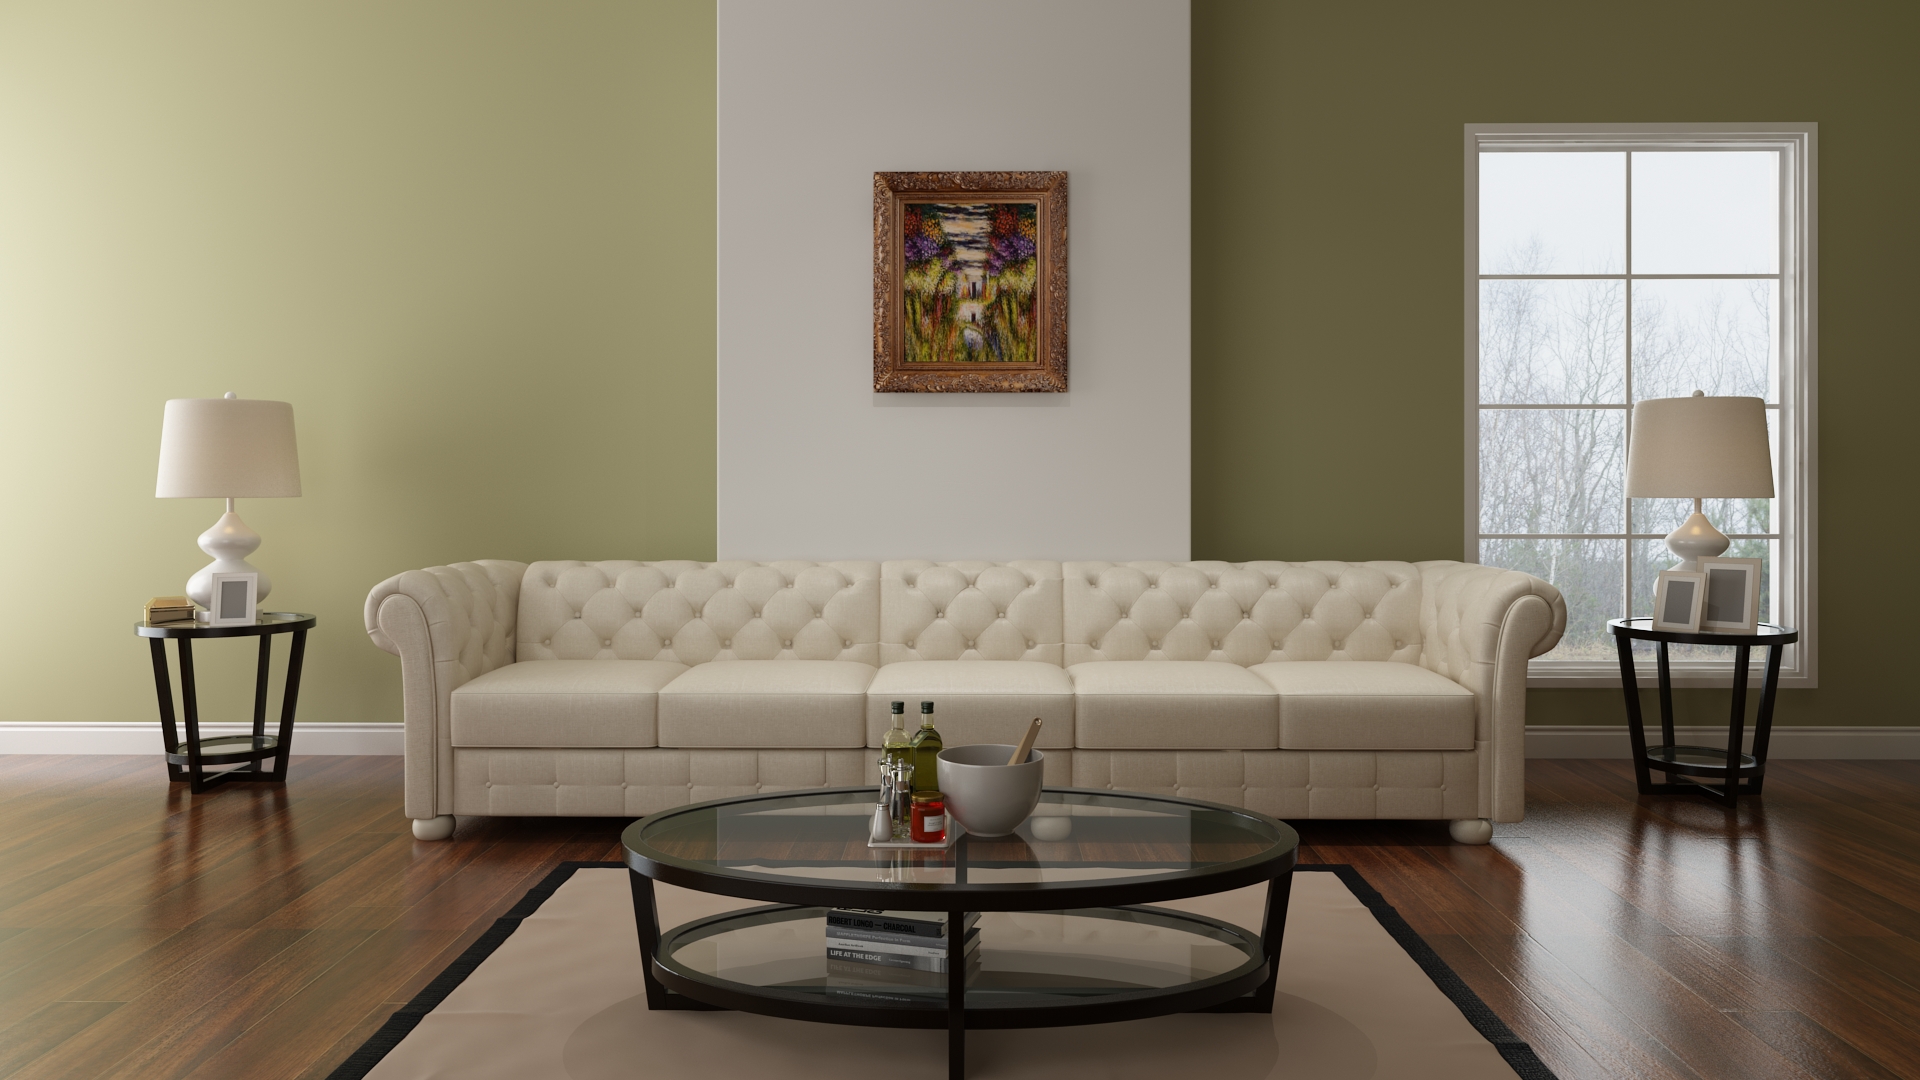 3D Interior Rendering Services 3D Interior Rendering Services by JMSDCONSULTANT